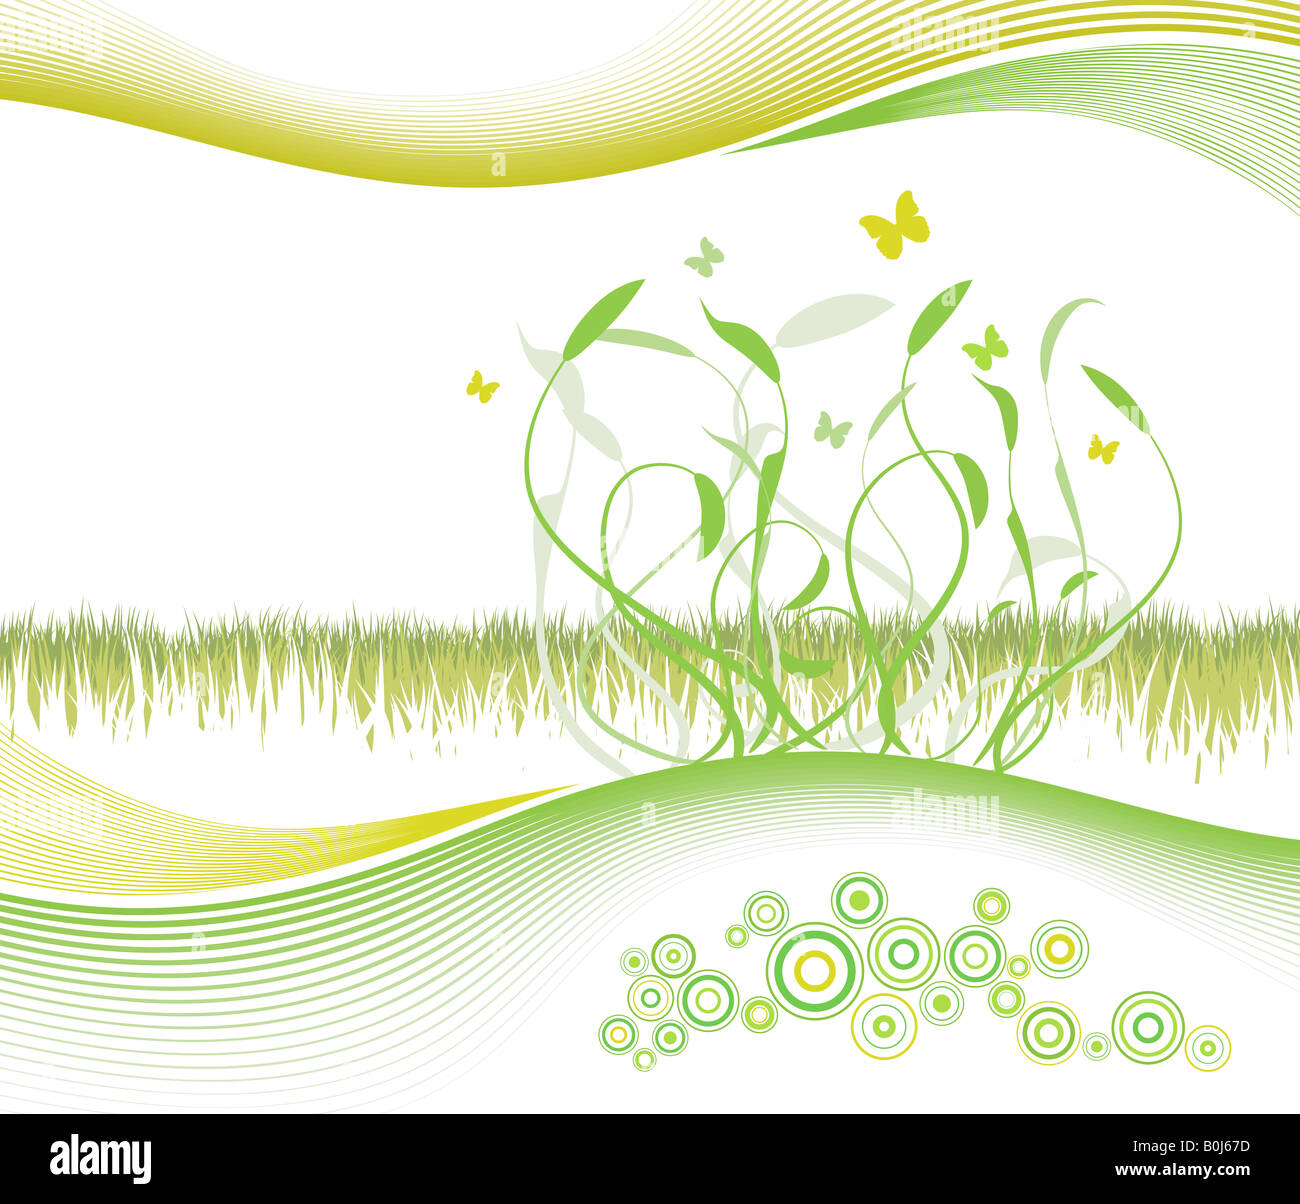 Vector illustration of a summer spring floral and lined art background with cheery circles and copy space Stock Photo